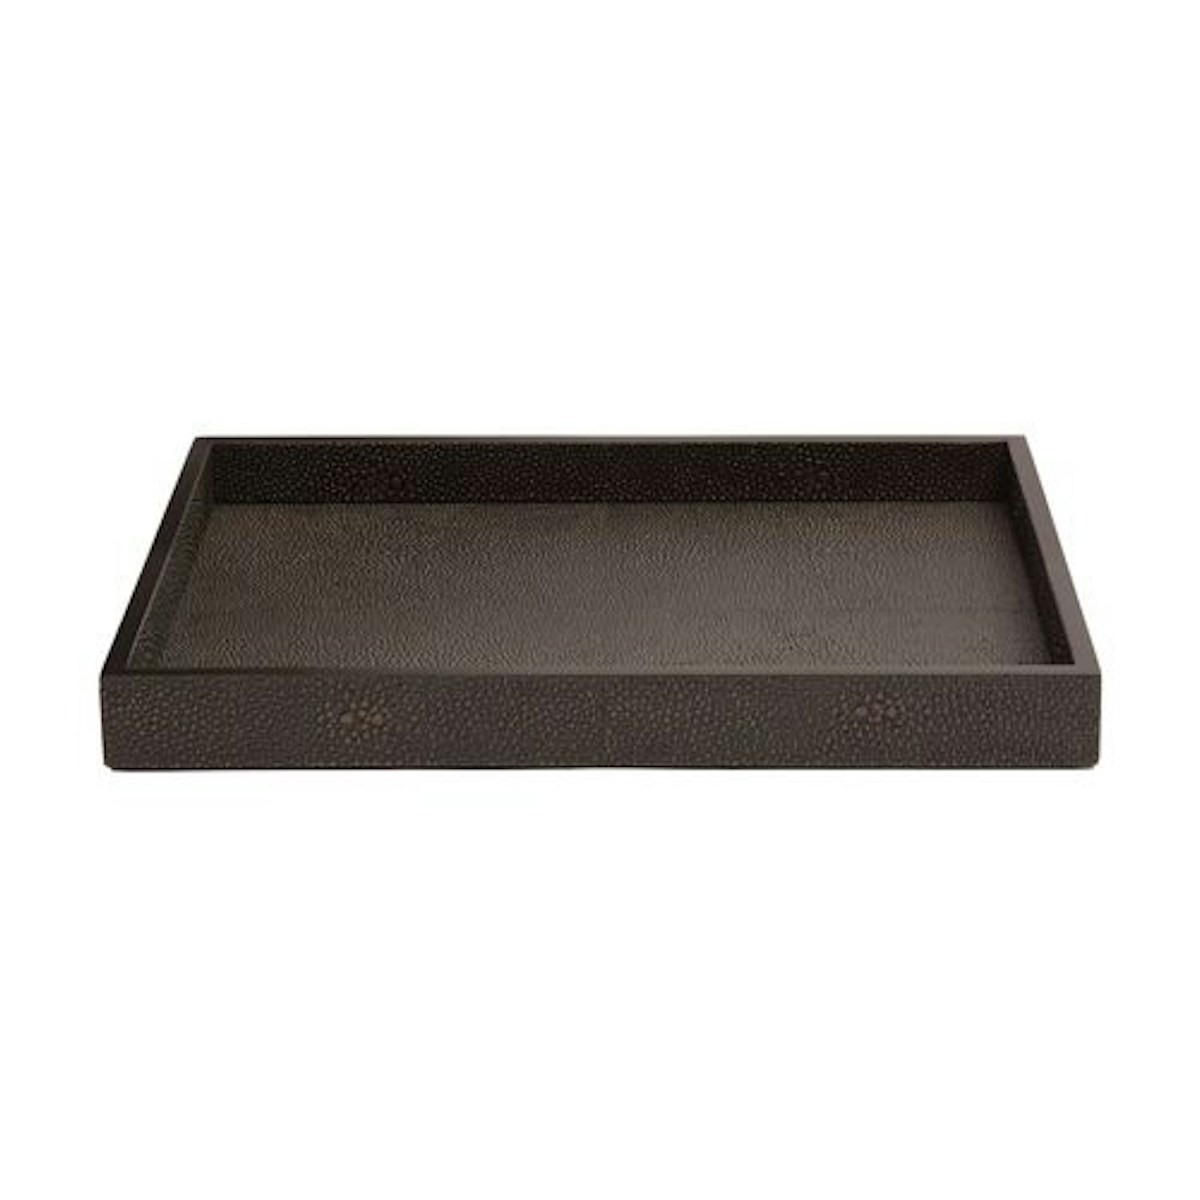 Chelsea Medium Tray Shagreen Chocolate - 21 Best Decorative Trays To Buy For Your Tabletop - LuxDeco.com